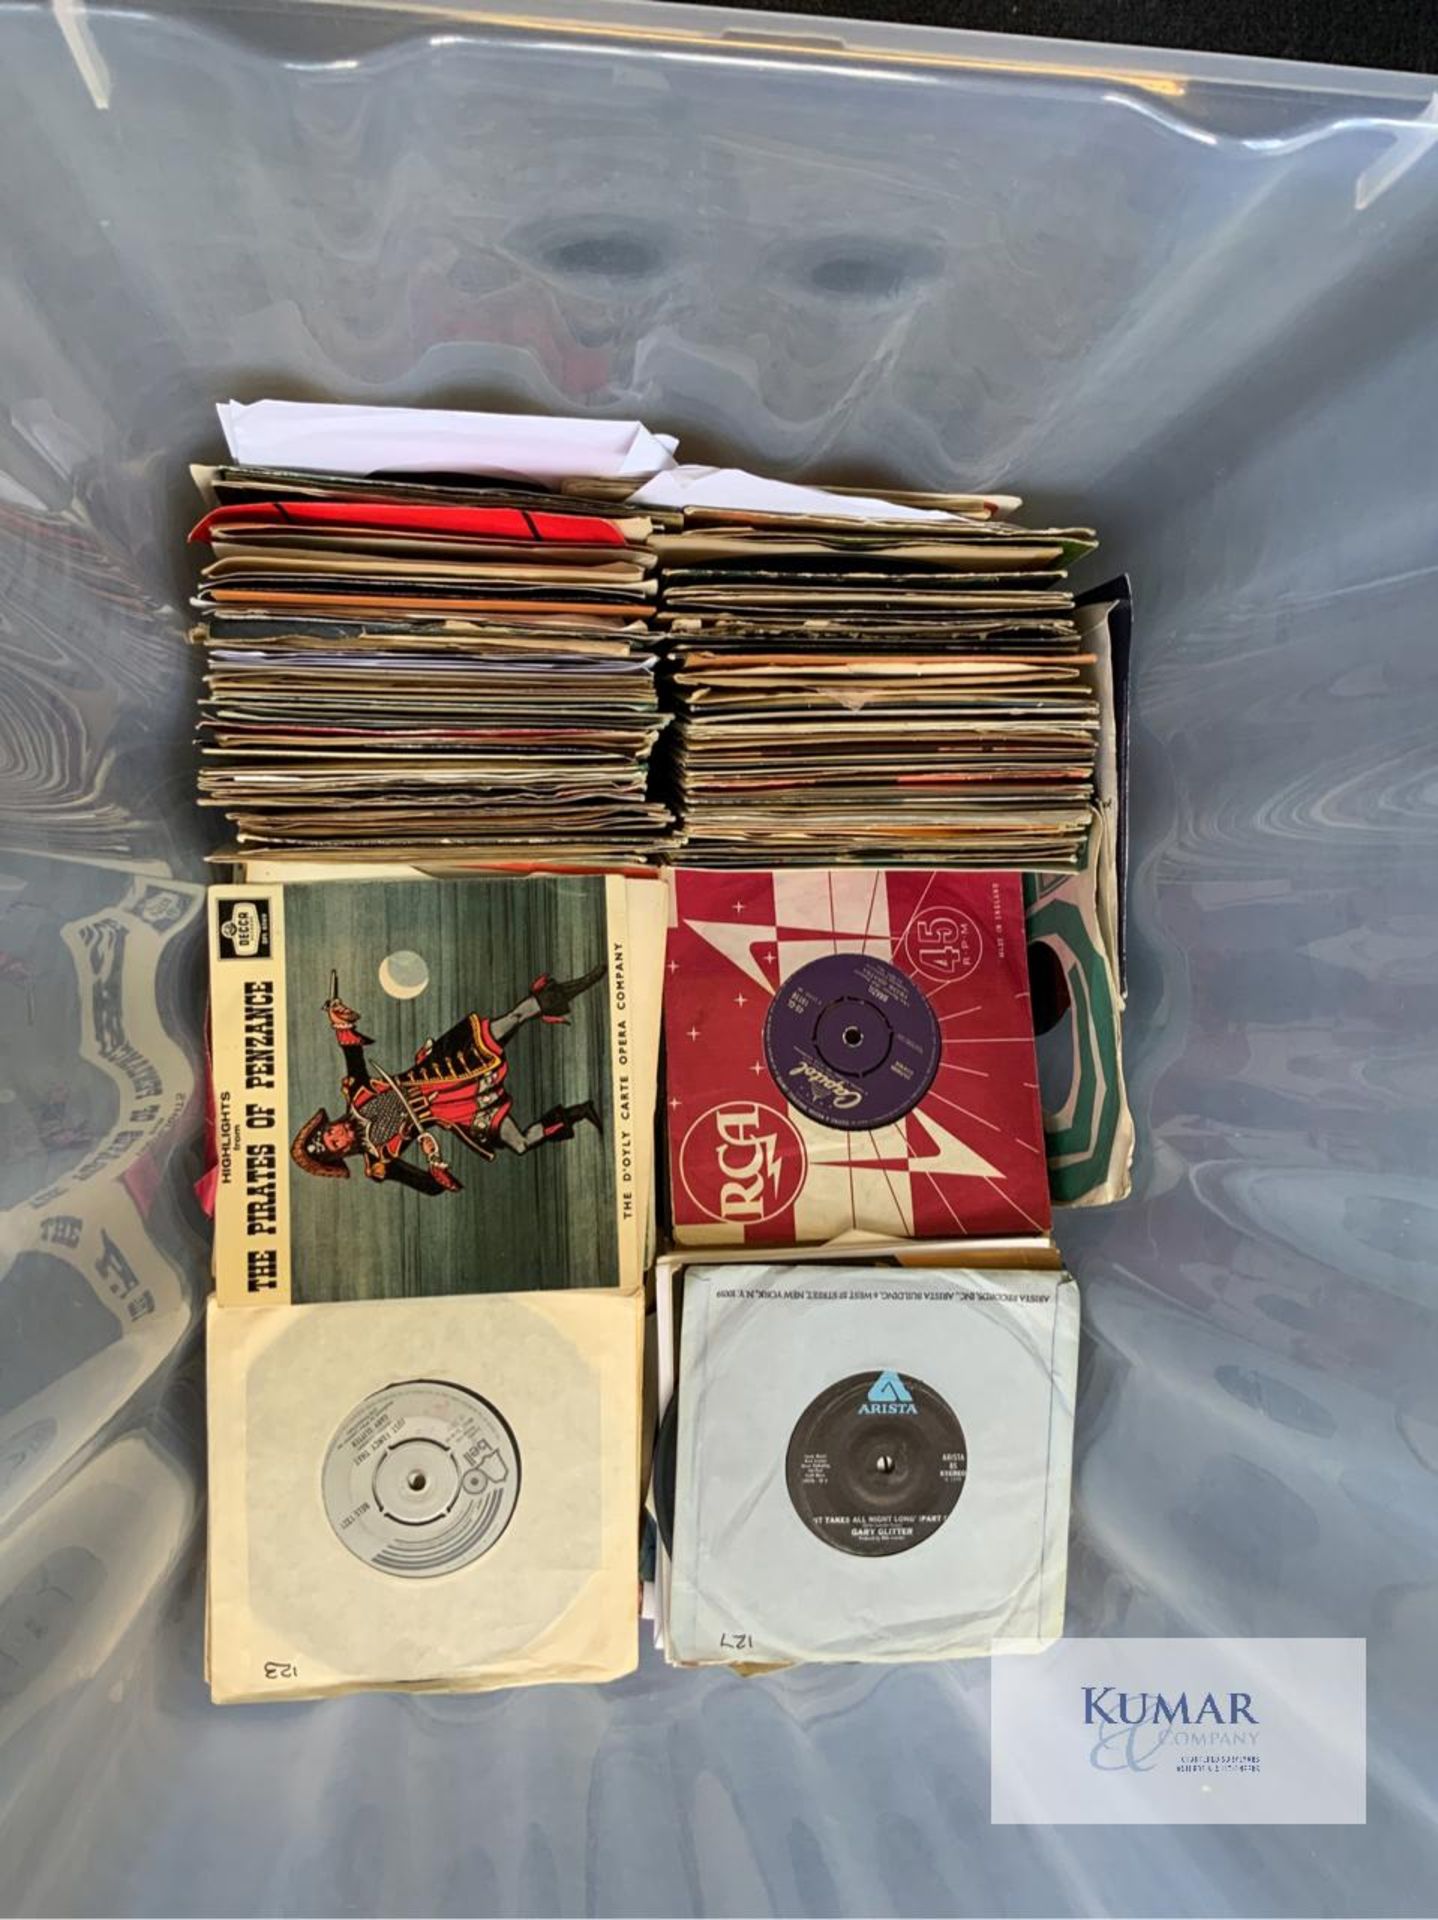 Large Collection of Vintage And Aged Vinyl Records, Books, Literature As Shown - Image 2 of 18